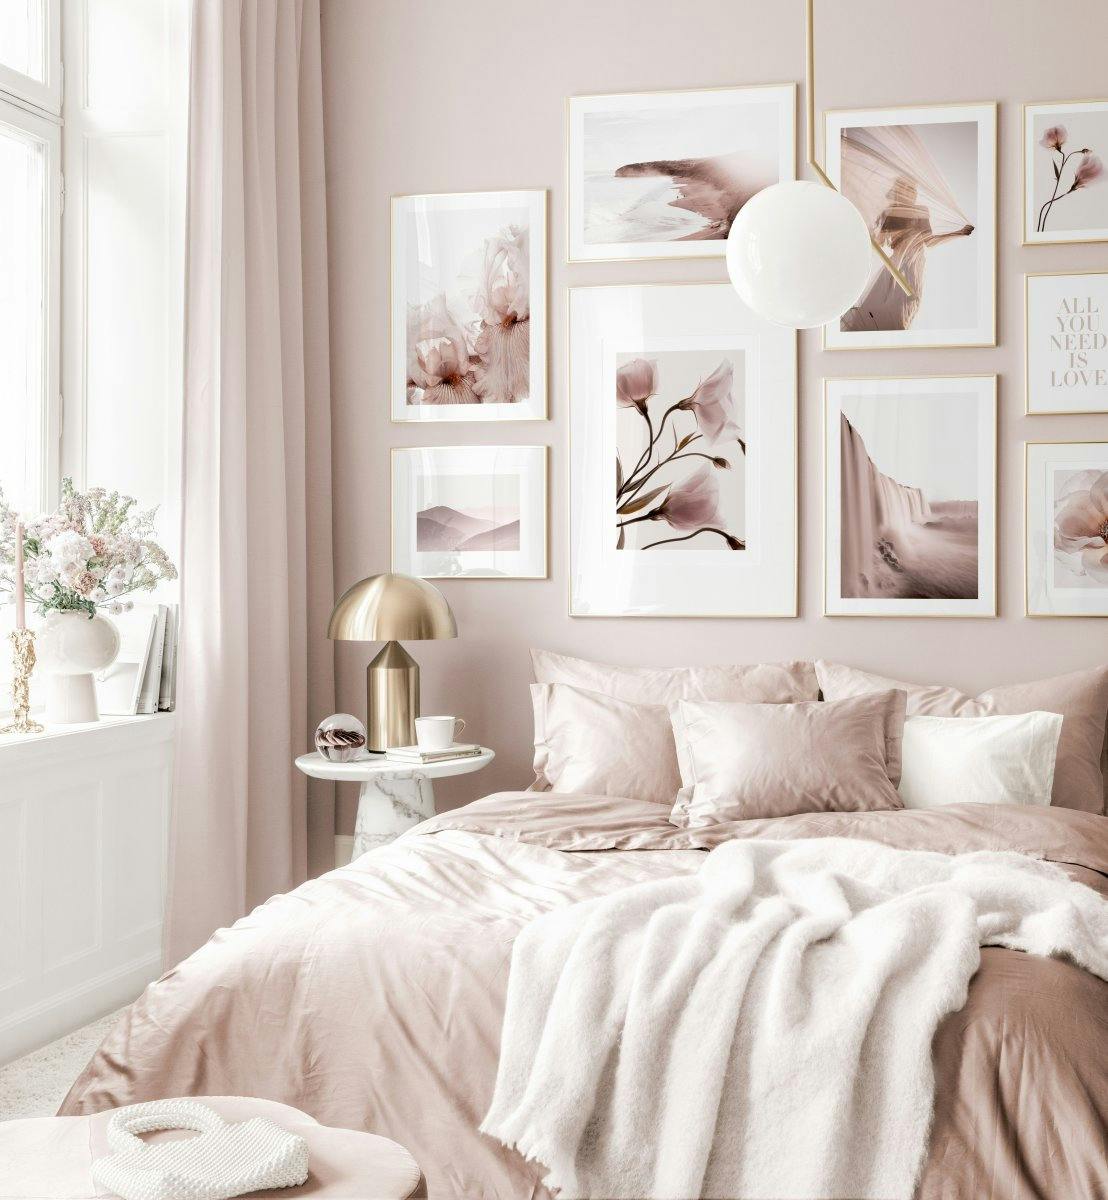 Glamorous gallery wall pink bedroom flower posters golden frames